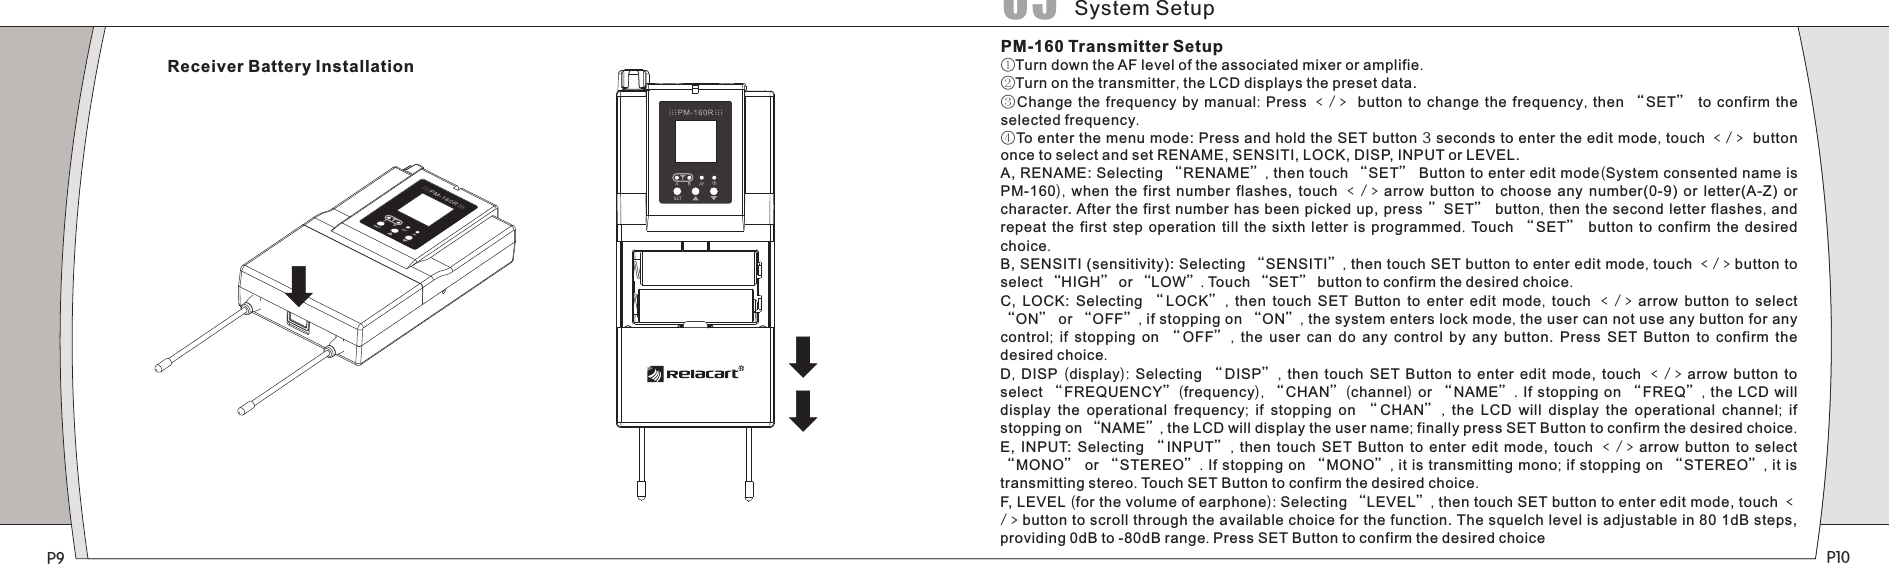 P9 P10PM-160 Transmitter Setup①Turn down the AF level of the associated mixer or amplifie.②Turn on the transmitter, the LCD displays the preset data.③Change the frequency  by  manual: Press ﹤/﹥ button to change the  frequency, then “SET”   to confirm the selected frequency. ④To enter the menu mode: Press and hold the SET button 3 seconds to enter the edit mode, touch ﹤/﹥ button once to select and set RENAME, SENSITI, LOCK, DISP, INPUT or LEVEL.A, RENAME: Selecting “RENAME”, then touch “SET” Button to enter edit mode(System consented name is PM-160),  when the  first  number  flashes,  touch  ﹤/﹥arrow  button  to  choose  any  number(0-9)  or  letter(A-Z)  or character. After the first number has been picked up, press ”SET” button, then the second letter flashes, and repeat the first step operation till the sixth letter is programmed.  Touch  “ SET”   button to confirm the desired choice.B, SENSITI (sensitivity): Selecting “SENSITI”, then touch SET button to enter edit mode, touch ﹤/﹥button to select “HIGH” or “LOW”. Touch “SET” button to confirm the desired choice.C,  LOCK:  Selecting  “LOCK” ,  then touch SET Button to enter edit mode,  touch ﹤/﹥arrow  button to select “ON” or “OFF”, if stopping on “ON”, the system enters lock mode, the user can not use any button for any control;  if stopping on  “ OFF” ,  the user can do any control by  any  button.  Press  SET  Button  to  confirm  the desired choice.D,  DISP  (display):  Selecting  “ DISP” ,  then  touch  SET  Button  to  enter  edit  mode,  touch ﹤/﹥arrow  button to select “FREQUENCY”(frequency),  “CHAN”(channel) or “ NAME”. If  stopping on  “FREQ”, the LCD will display the operational frequency;  if  stopping  on  “CHAN” ,  the LCD will display  the  operational  channel;  if stopping on “NAME”, the LCD will display the user name; finally press SET Button to confirm the desired choice.E,  INPUT:  Selecting  “INPUT” ,  then  touch  SET  Button  to  enter  edit  mode,  touch ﹤/﹥arrow  button to select “MONO” or “STEREO”. If stopping on “MONO”, it is transmitting mono; if stopping on “STEREO”, it is transmitting stereo. Touch SET Button to confirm the desired choice.F, LEVEL (for the volume of earphone): Selecting “LEVEL”, then touch SET button to enter edit mode, touch ﹤/﹥button to scroll through the available choice for the function. The squelch level is adjustable in 80 1dB steps, providing 0dB to -80dB range. Press SET Button to confirm the desired choiceReceiver Battery InstallationSystem Setup05